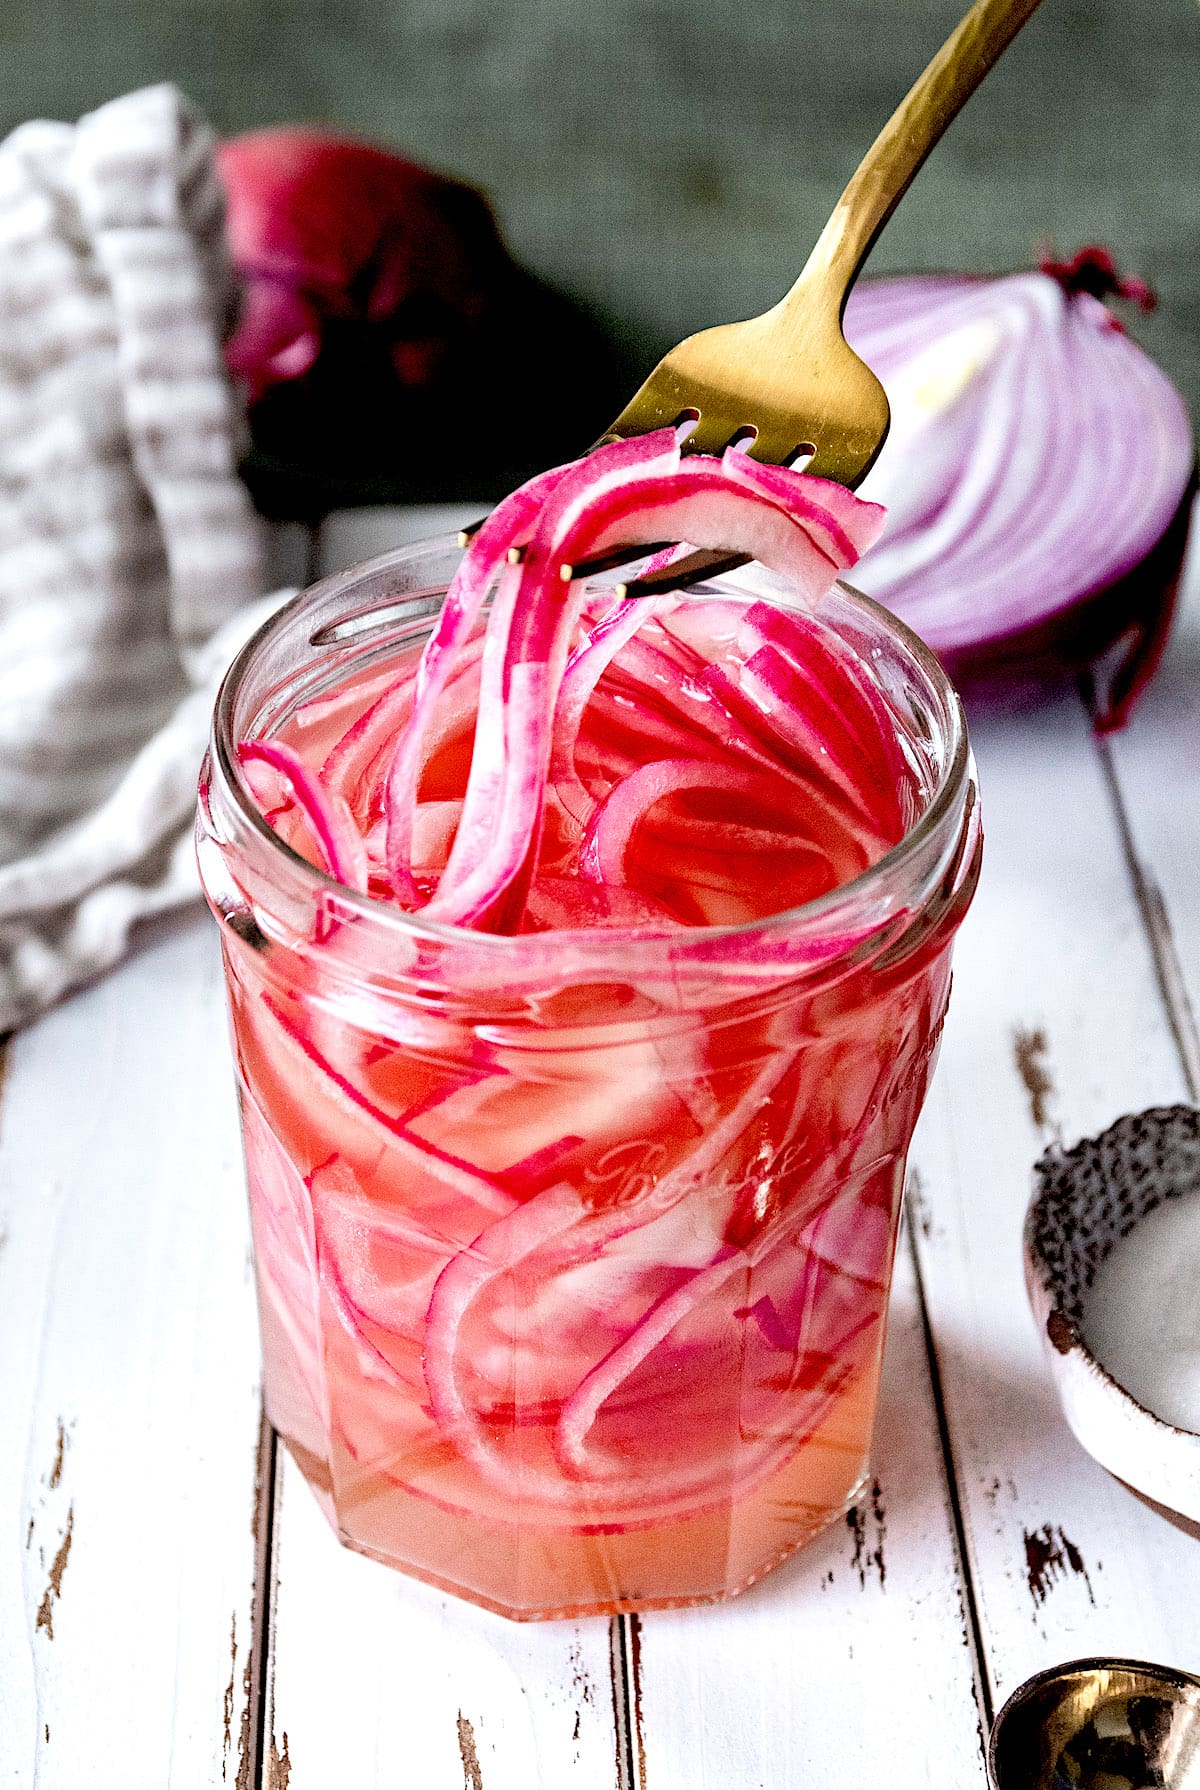 https://www.twopeasandtheirpod.com/wp-content/uploads/2022/03/Pickled-Red-Onions-10.jpg